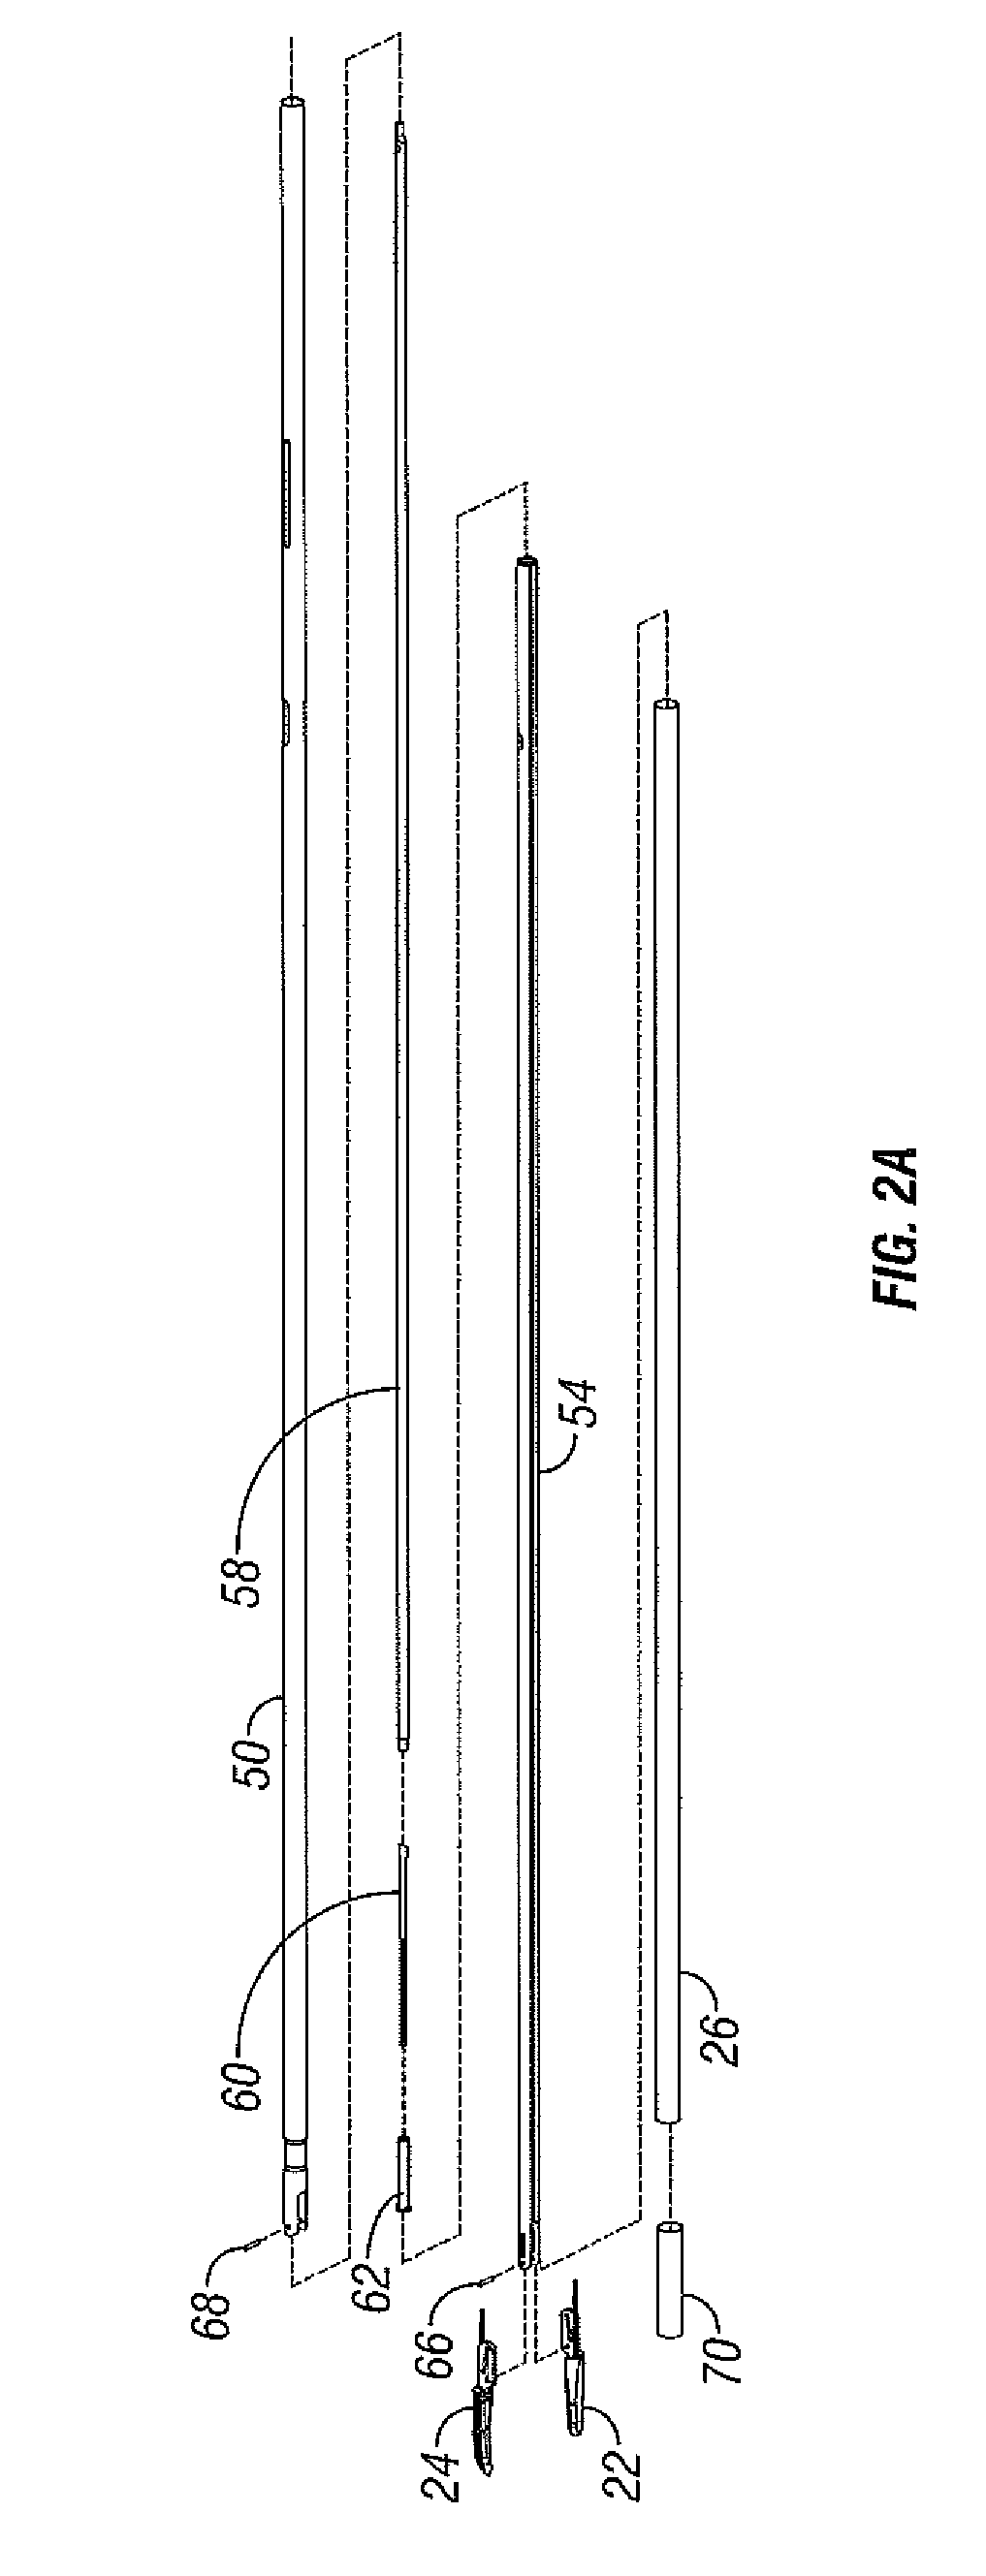 Automated assembly device to tolerate blade variation